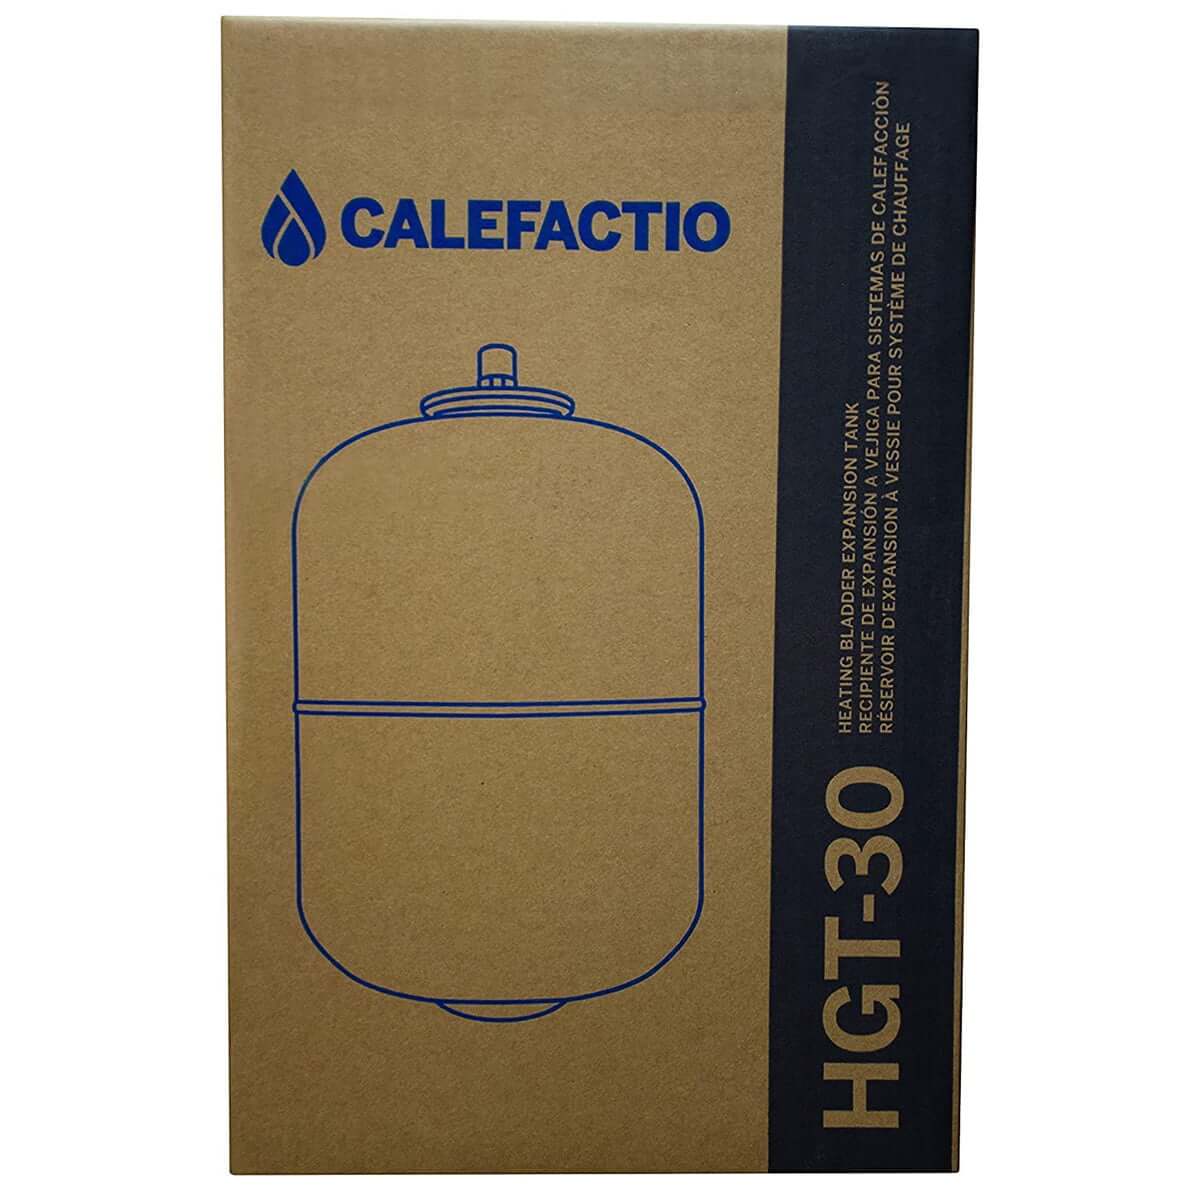 Calefactio HGT-30 Expansion tank for water and glycol in-floor radiant floor system - box